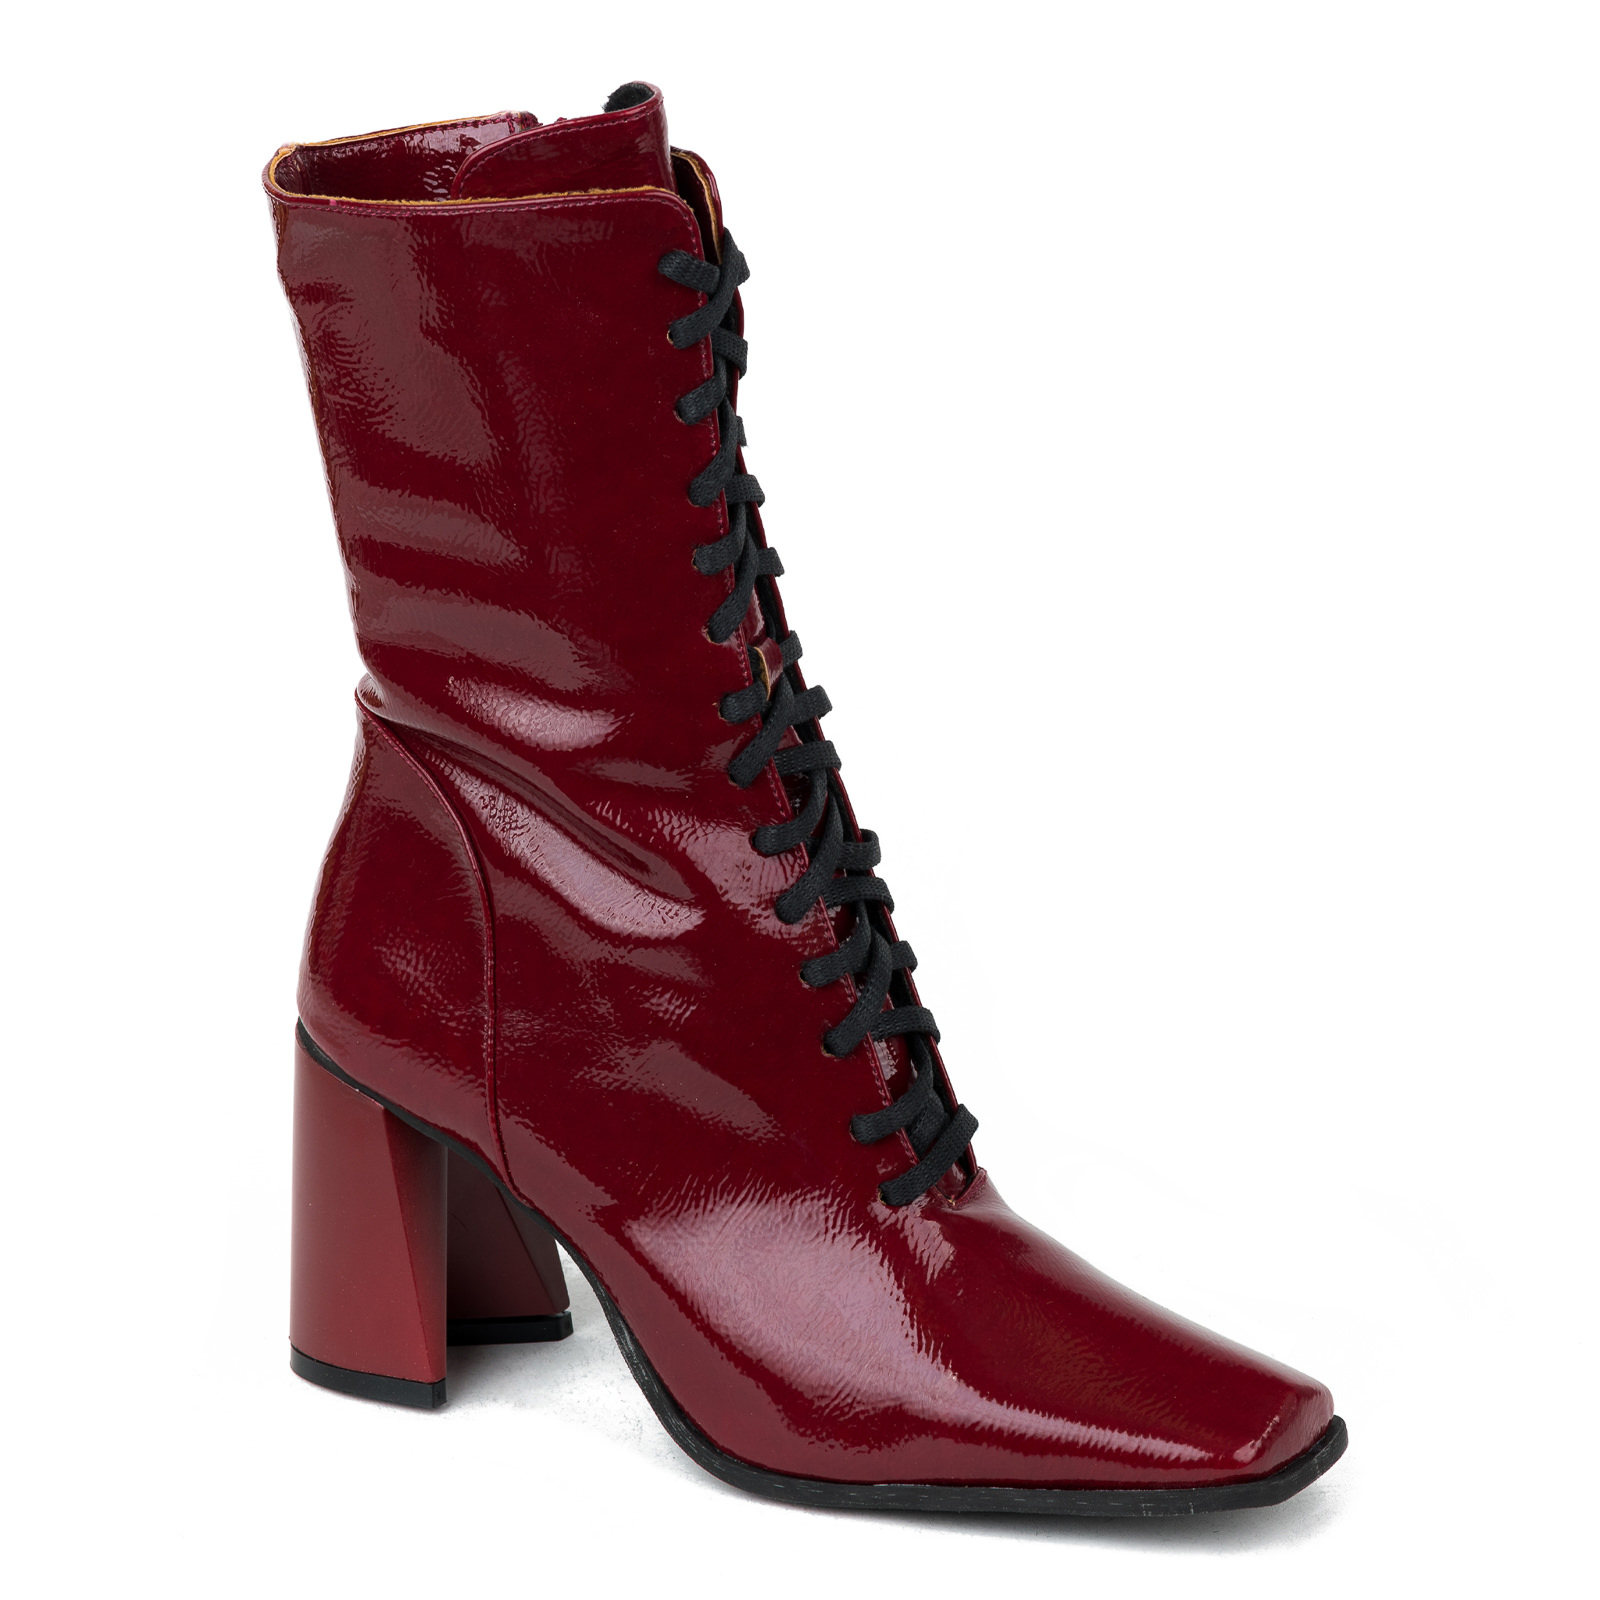 Women ankle boots B486 - WINE RED